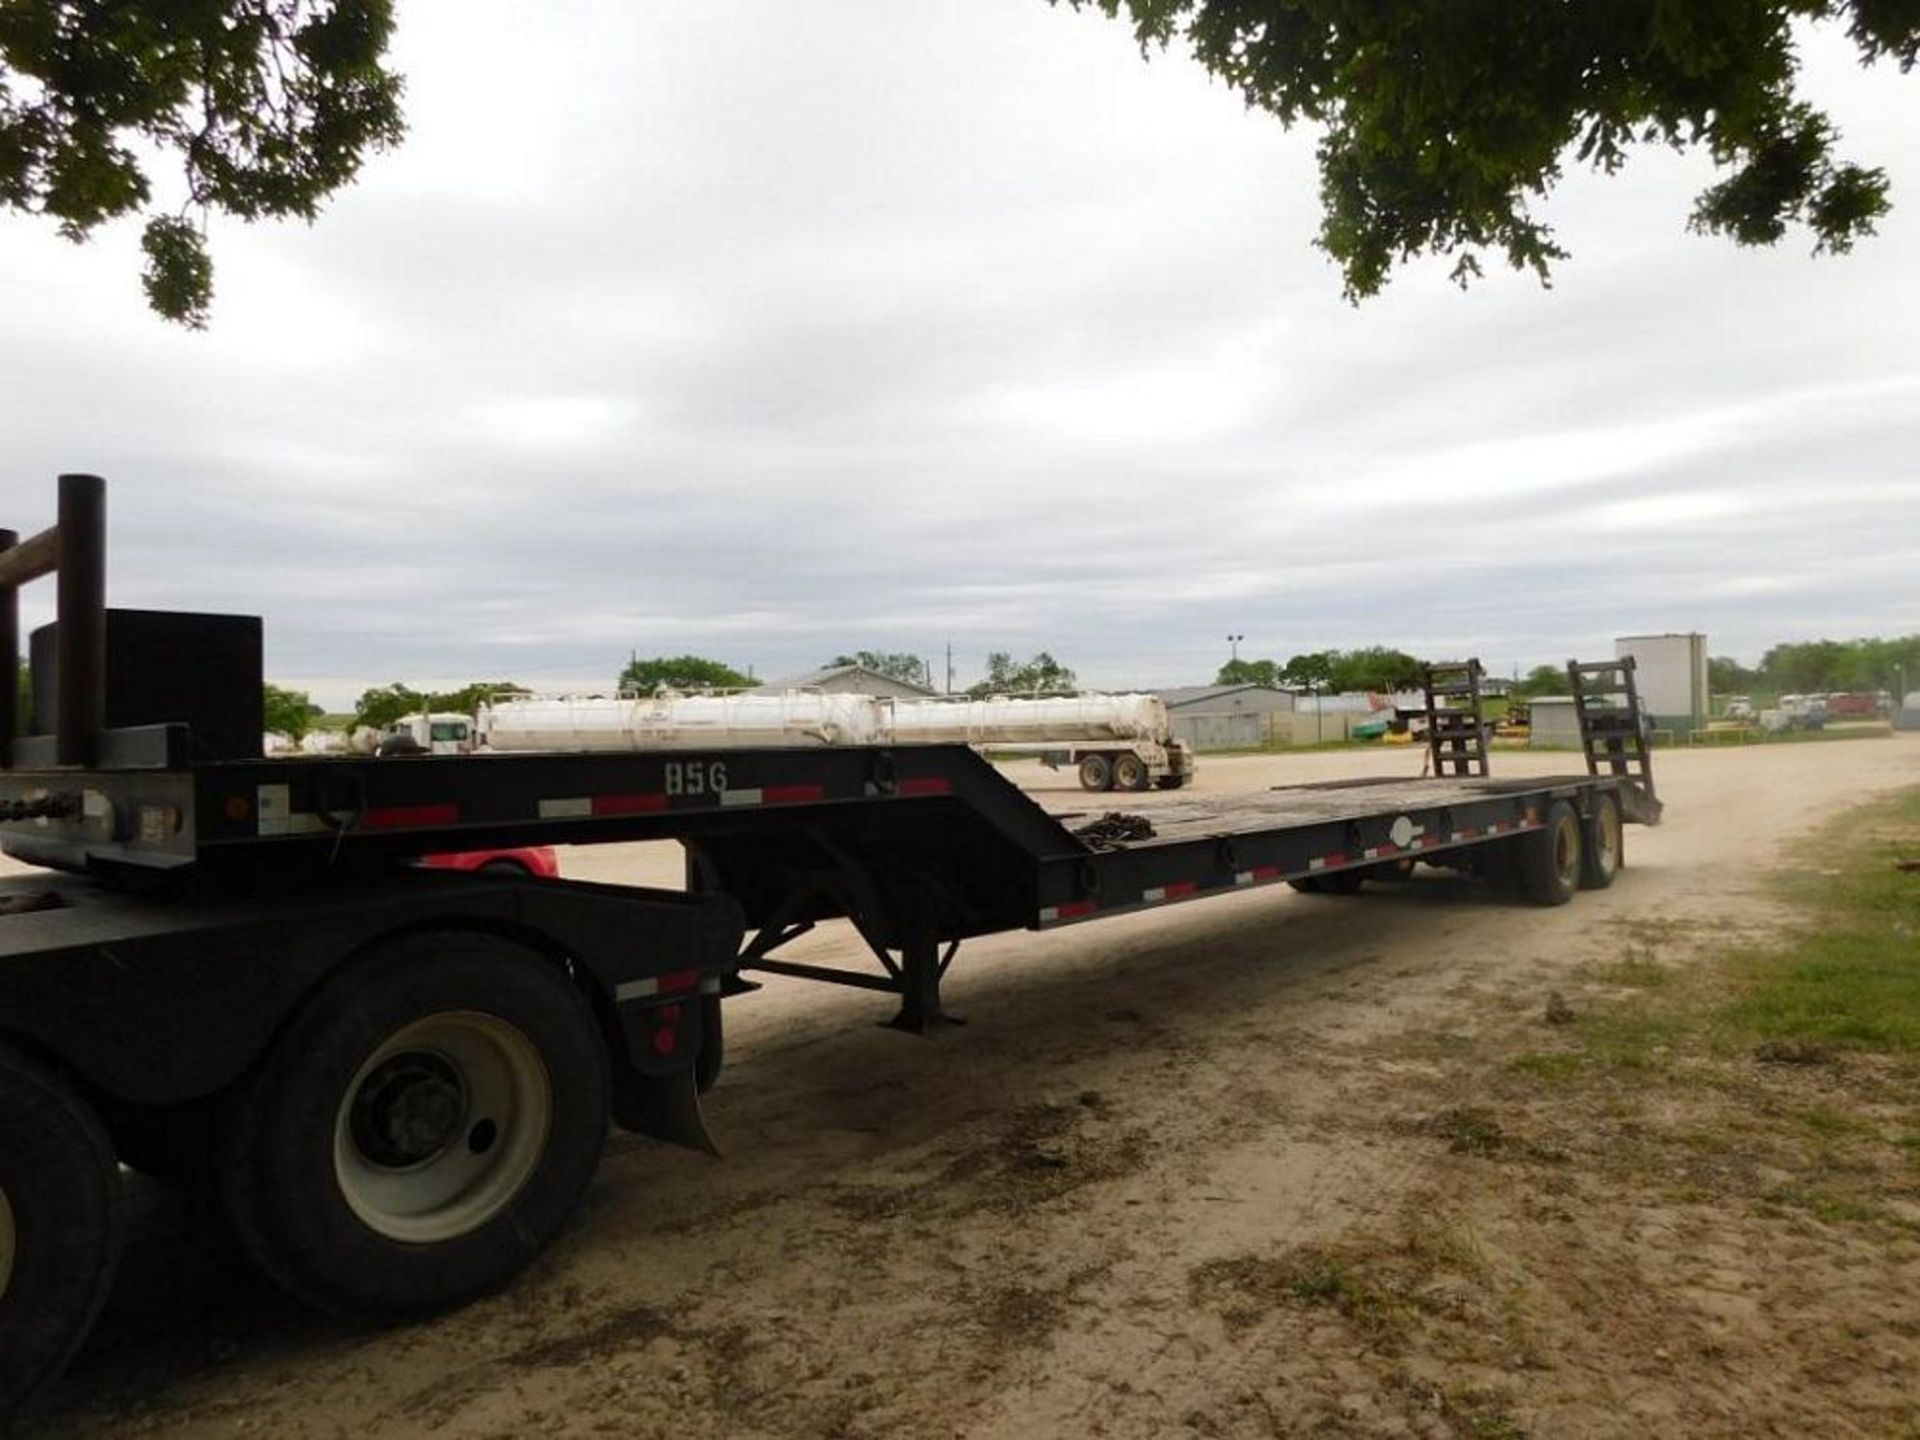 2013 Viking Tandem-Axle Equipment Trailer, VIN 1V9CR4624DN062853, 102 in. Wide, 46 ft. Long Overall, - Image 2 of 3